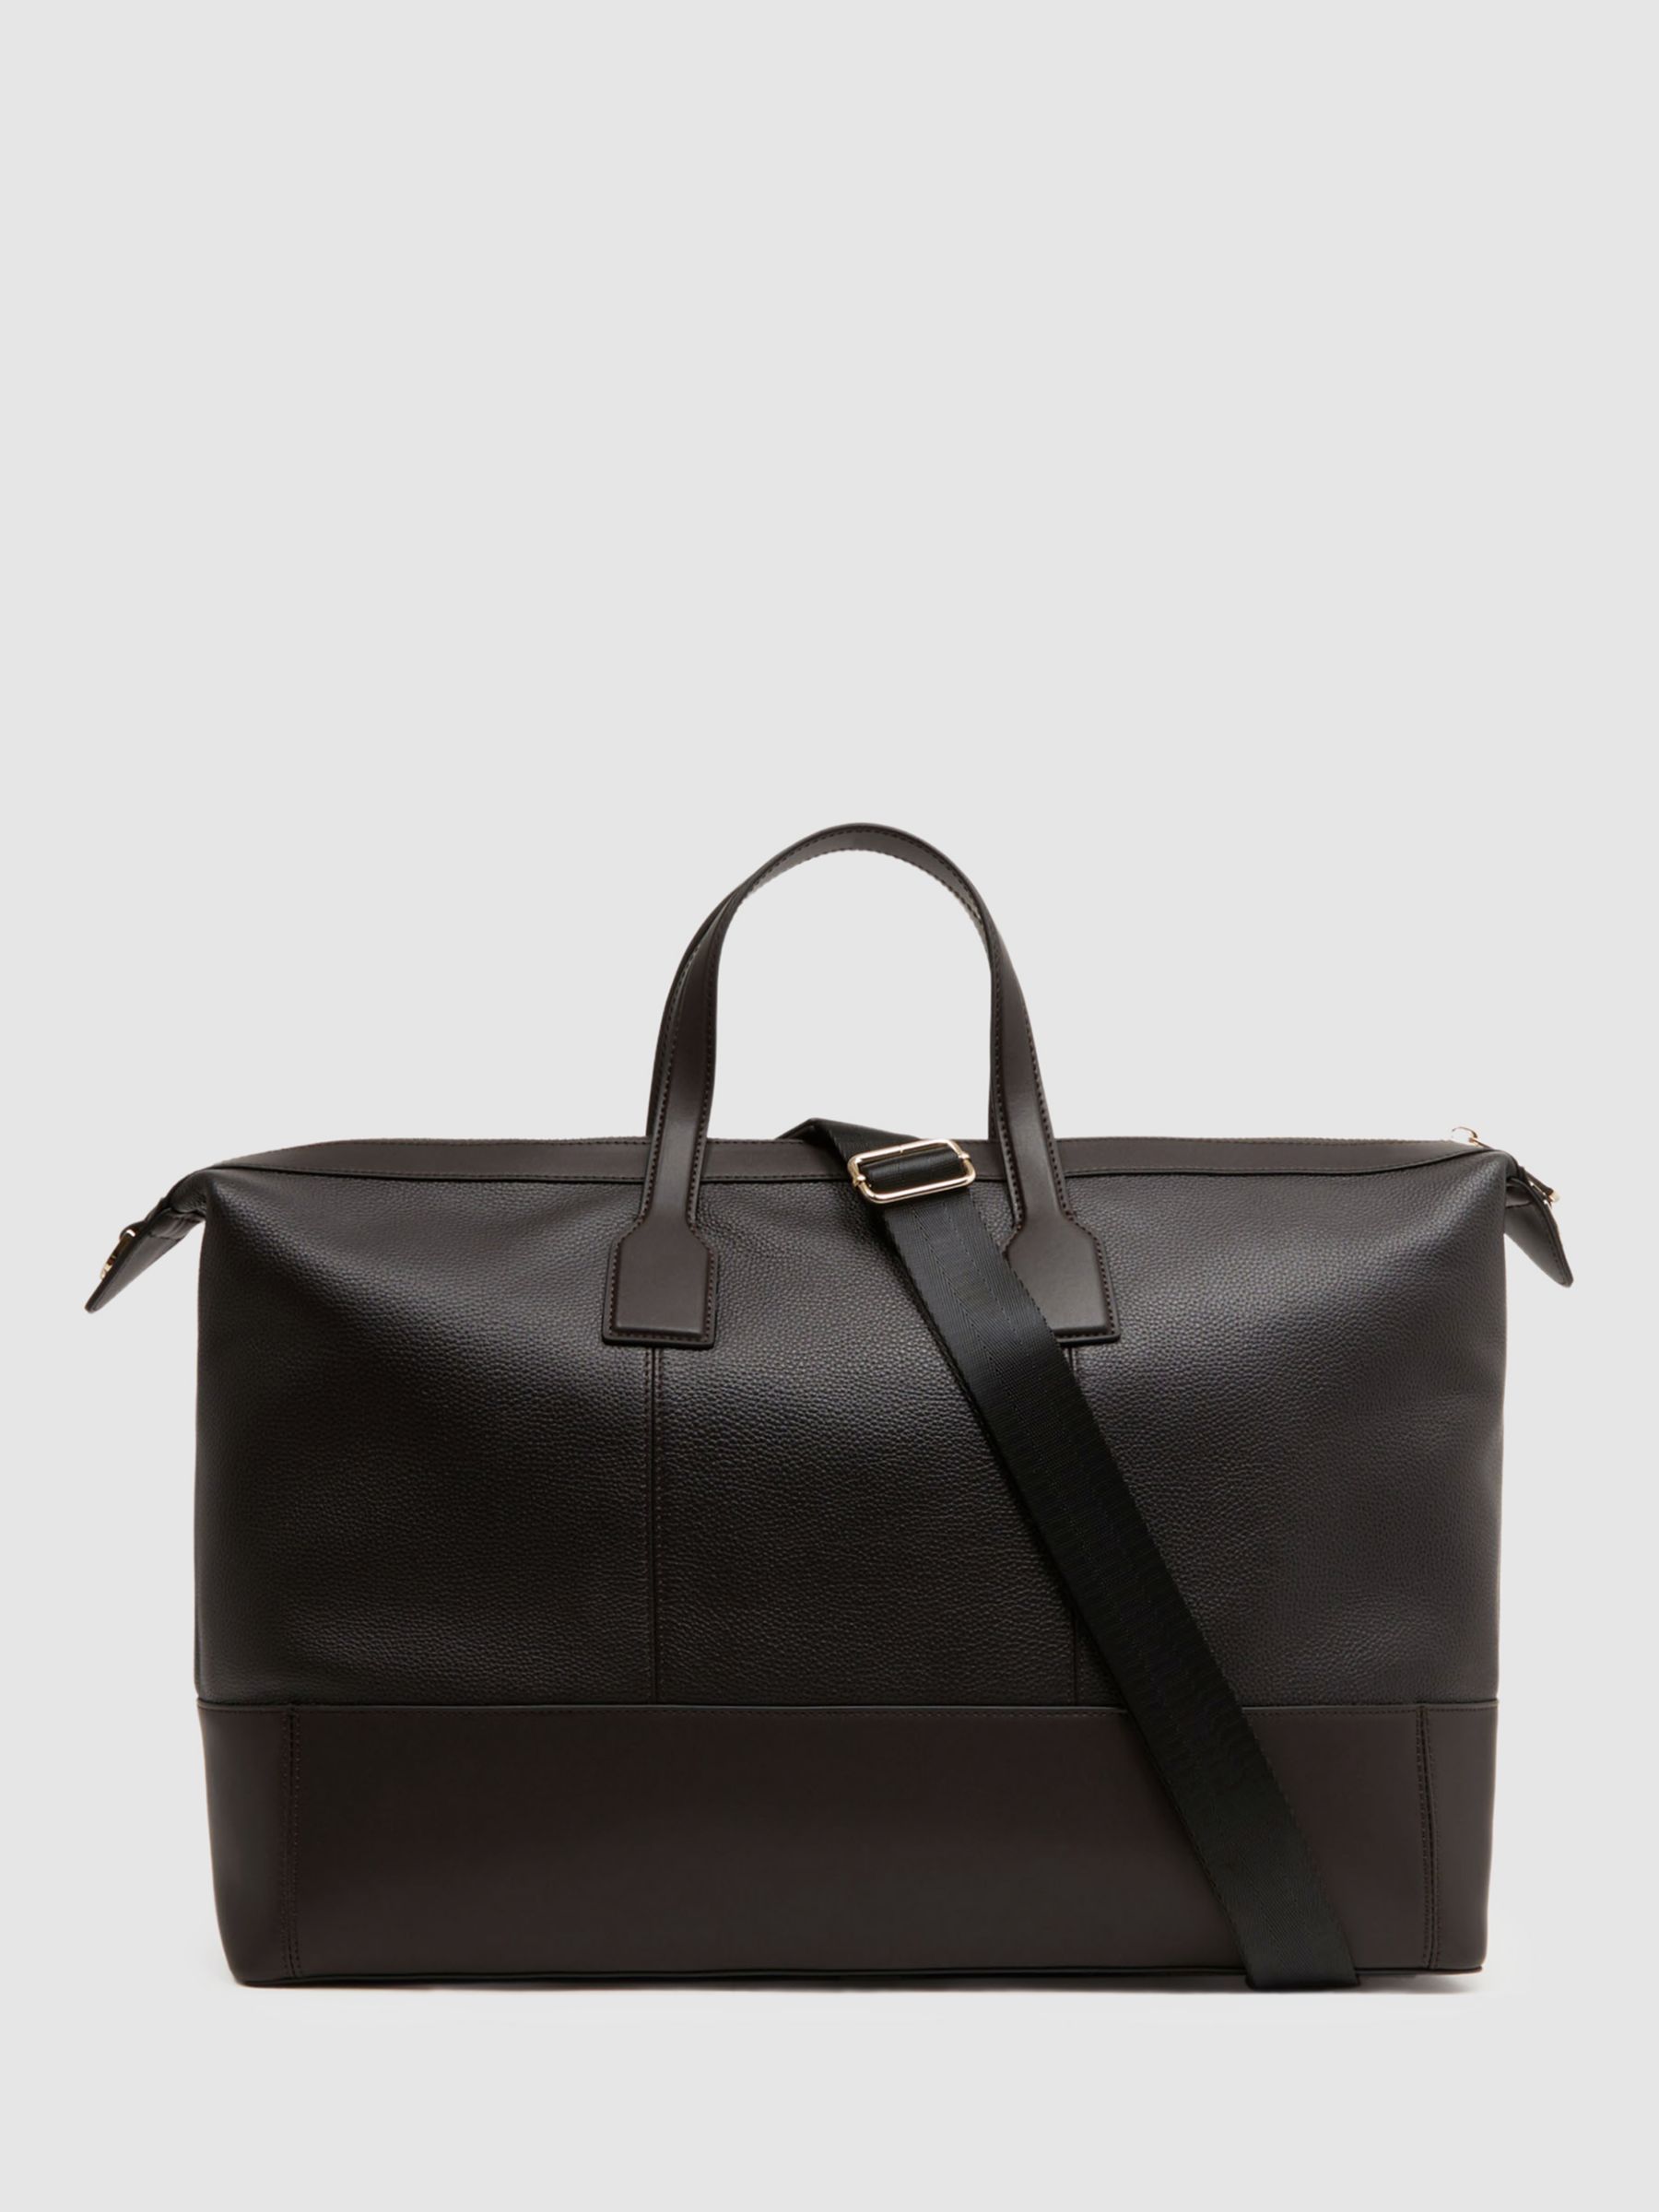 Reiss Carter Leather Hodall Bag, Chocolate, One Size